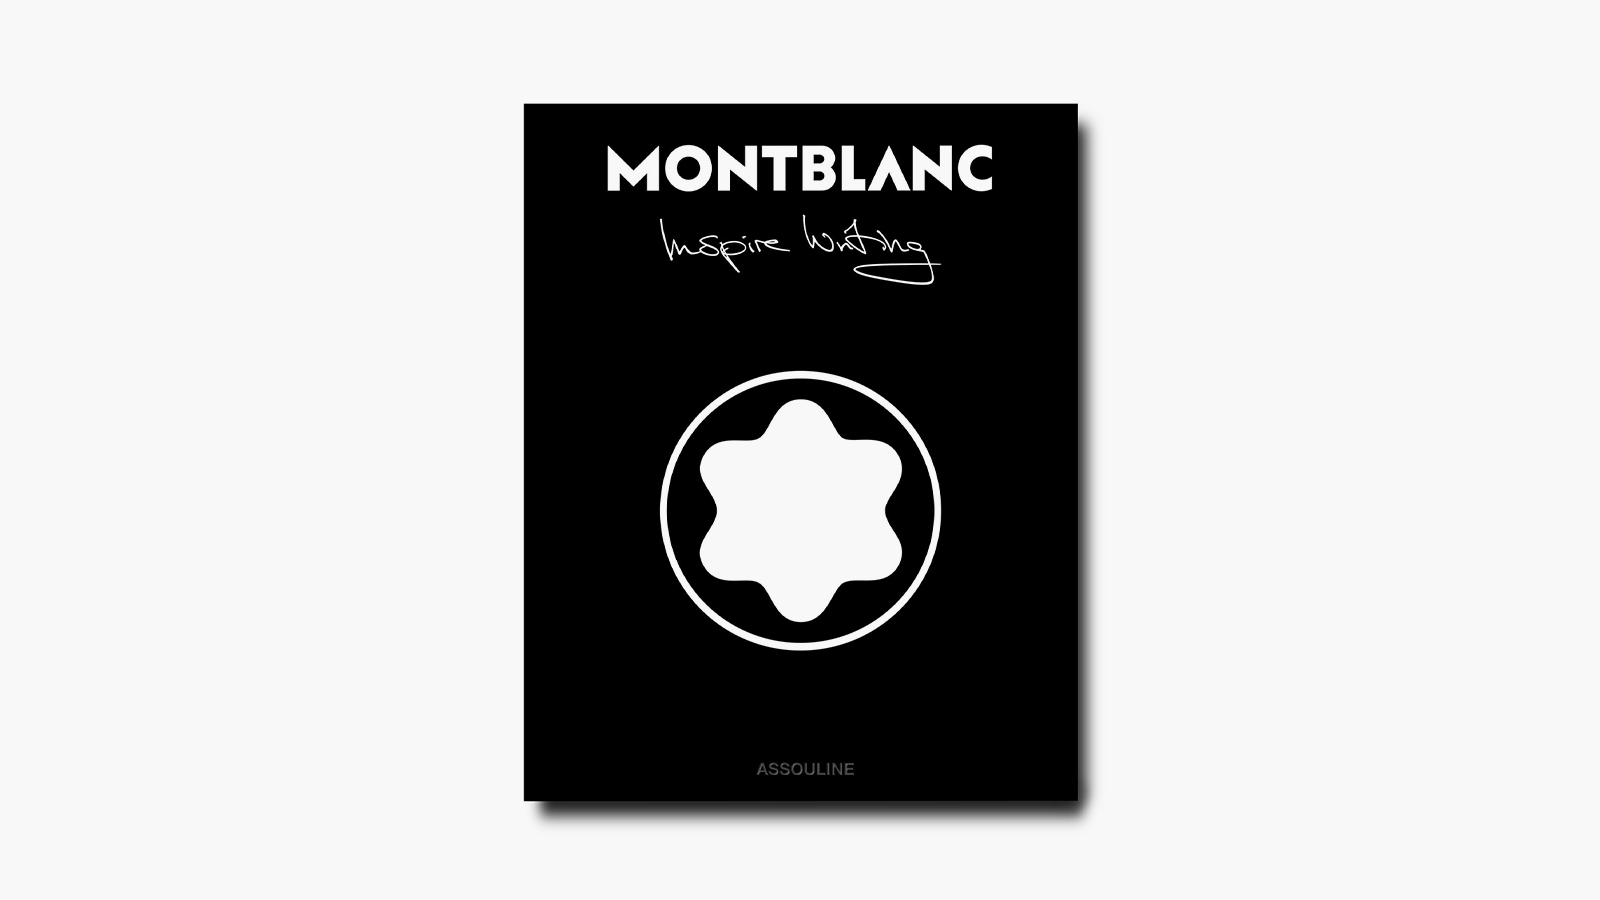 ‘Montblanc: Inspire Writing’ by Alexander Fury